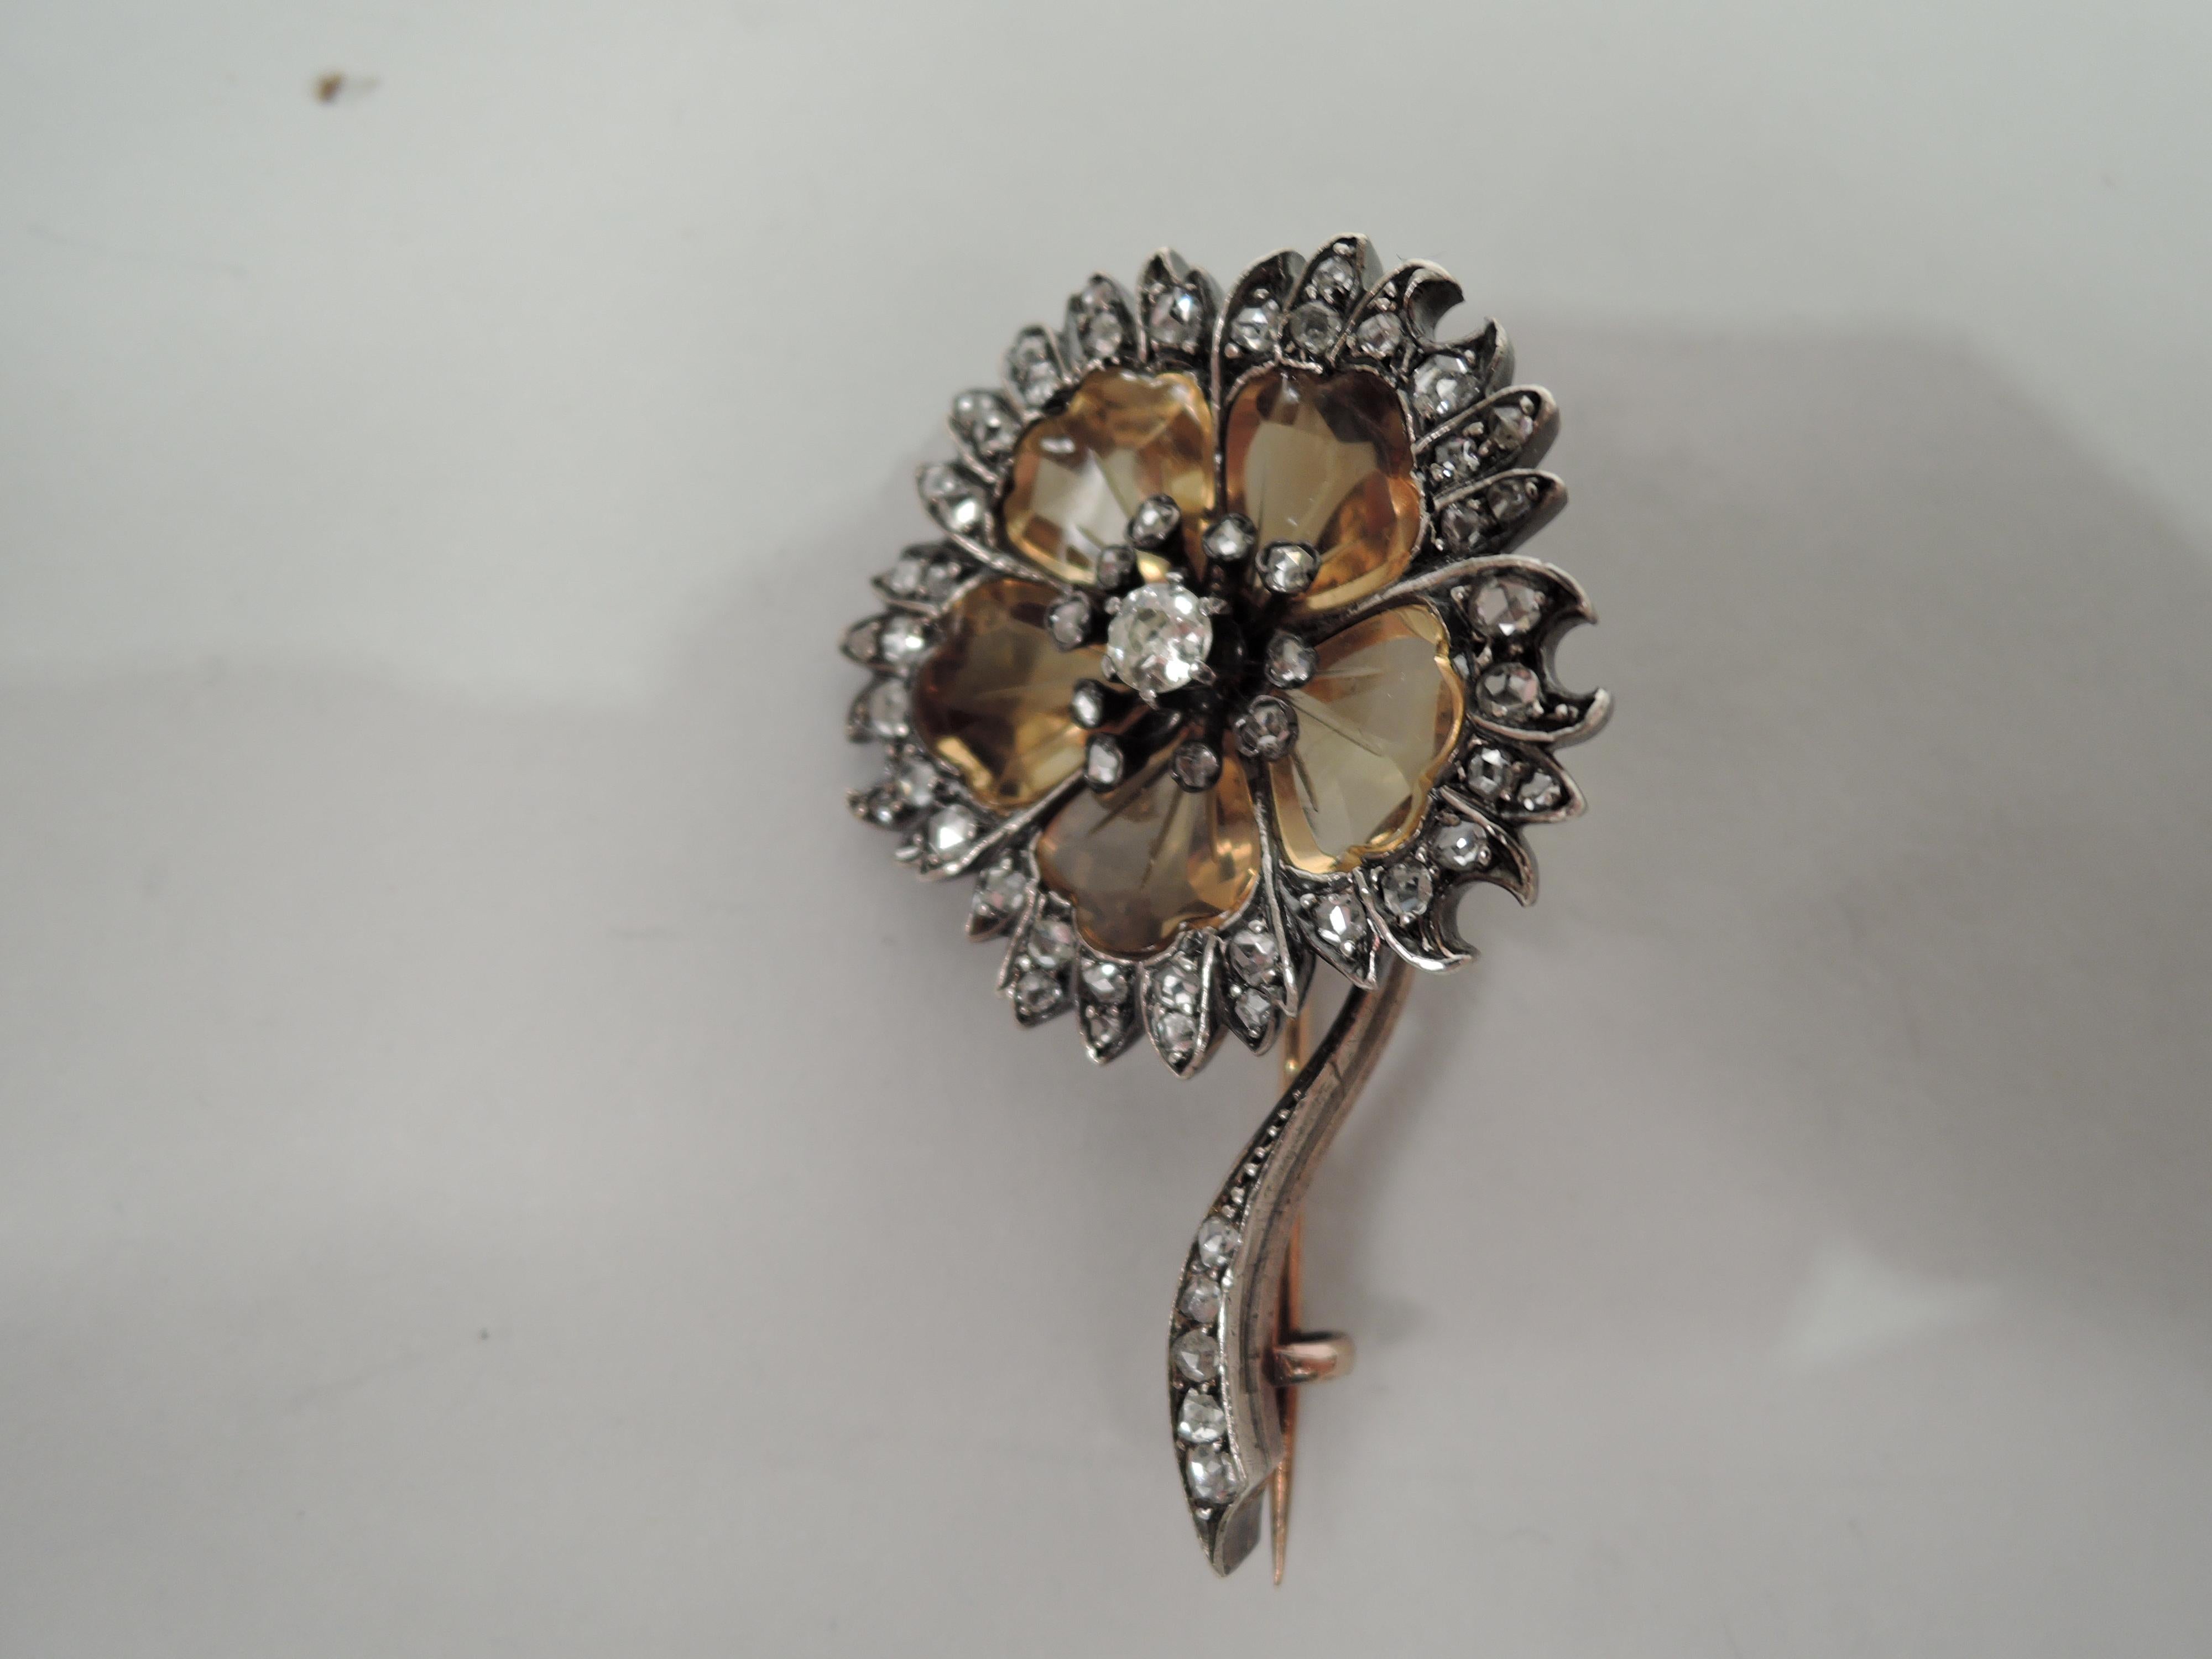 This pretty brooch with stones mounted in silver-topped 18k gold has been designed in the shape of a flower. The petals have been formed from 5 incised citrines in a warm smokey yellow-brown color which surround a cut diamond in the center. The stem